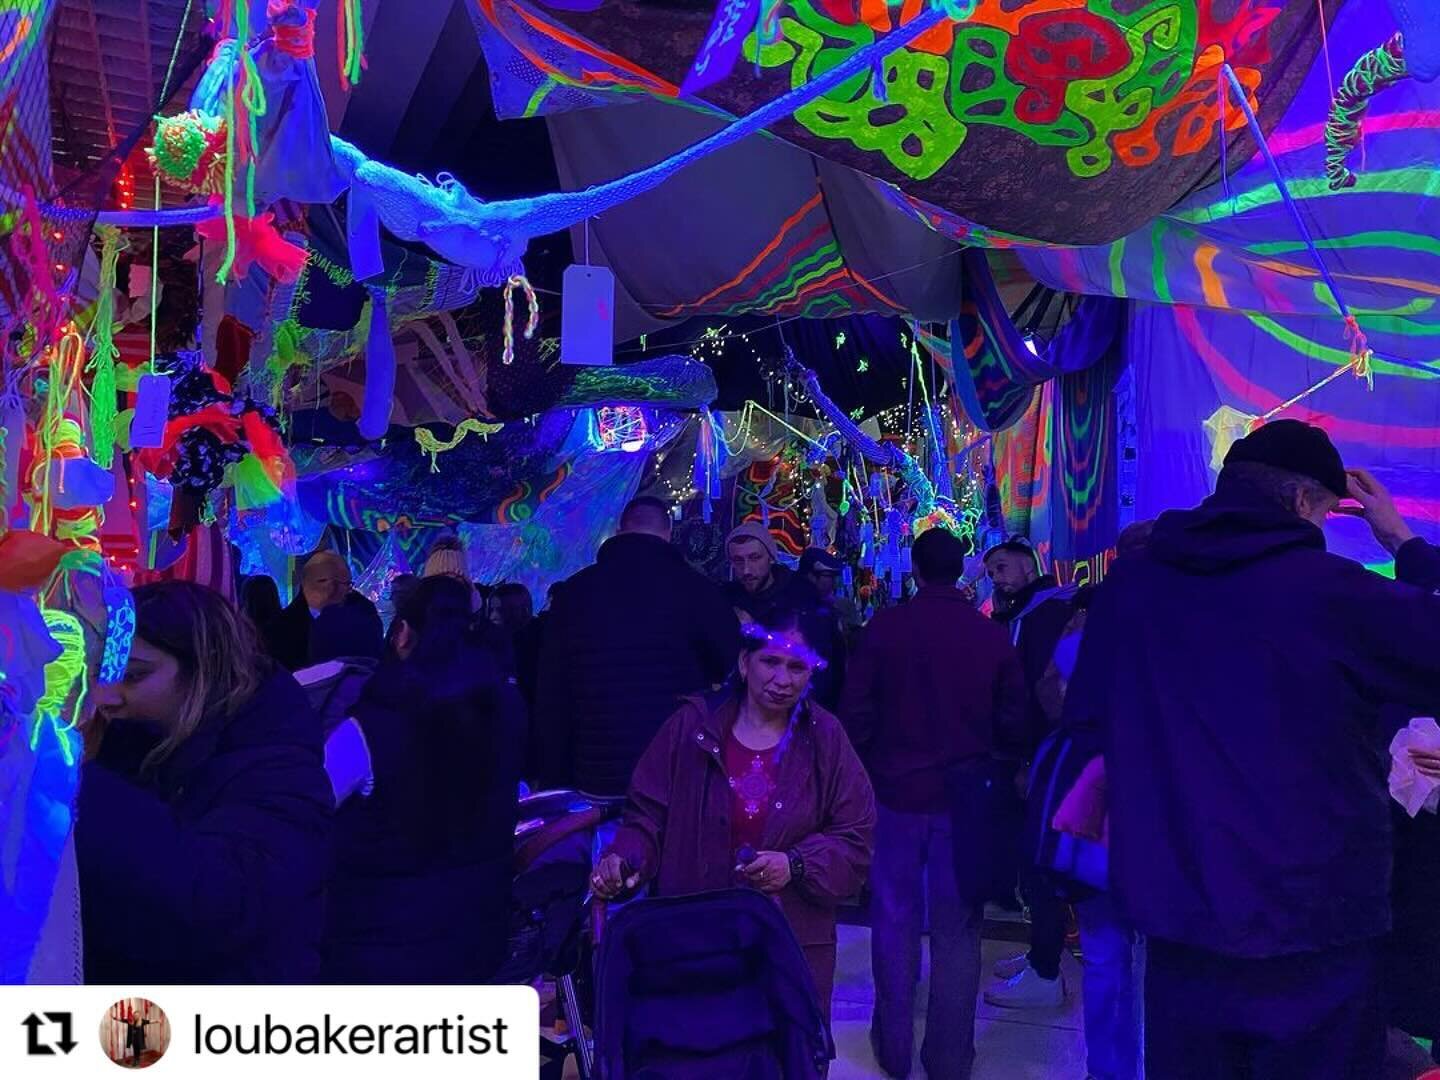 Congratulations to @loubakerartist @olybliss @severnarts for this astonishing magical experience! 🎉
#Repost @loubakerartist with @use.repost
・・・
Wow. What a fabulous busy and buzzing first night of @severnarts Light Night! ⭐️⭐️⭐️⭐️⭐️

We had nearly 